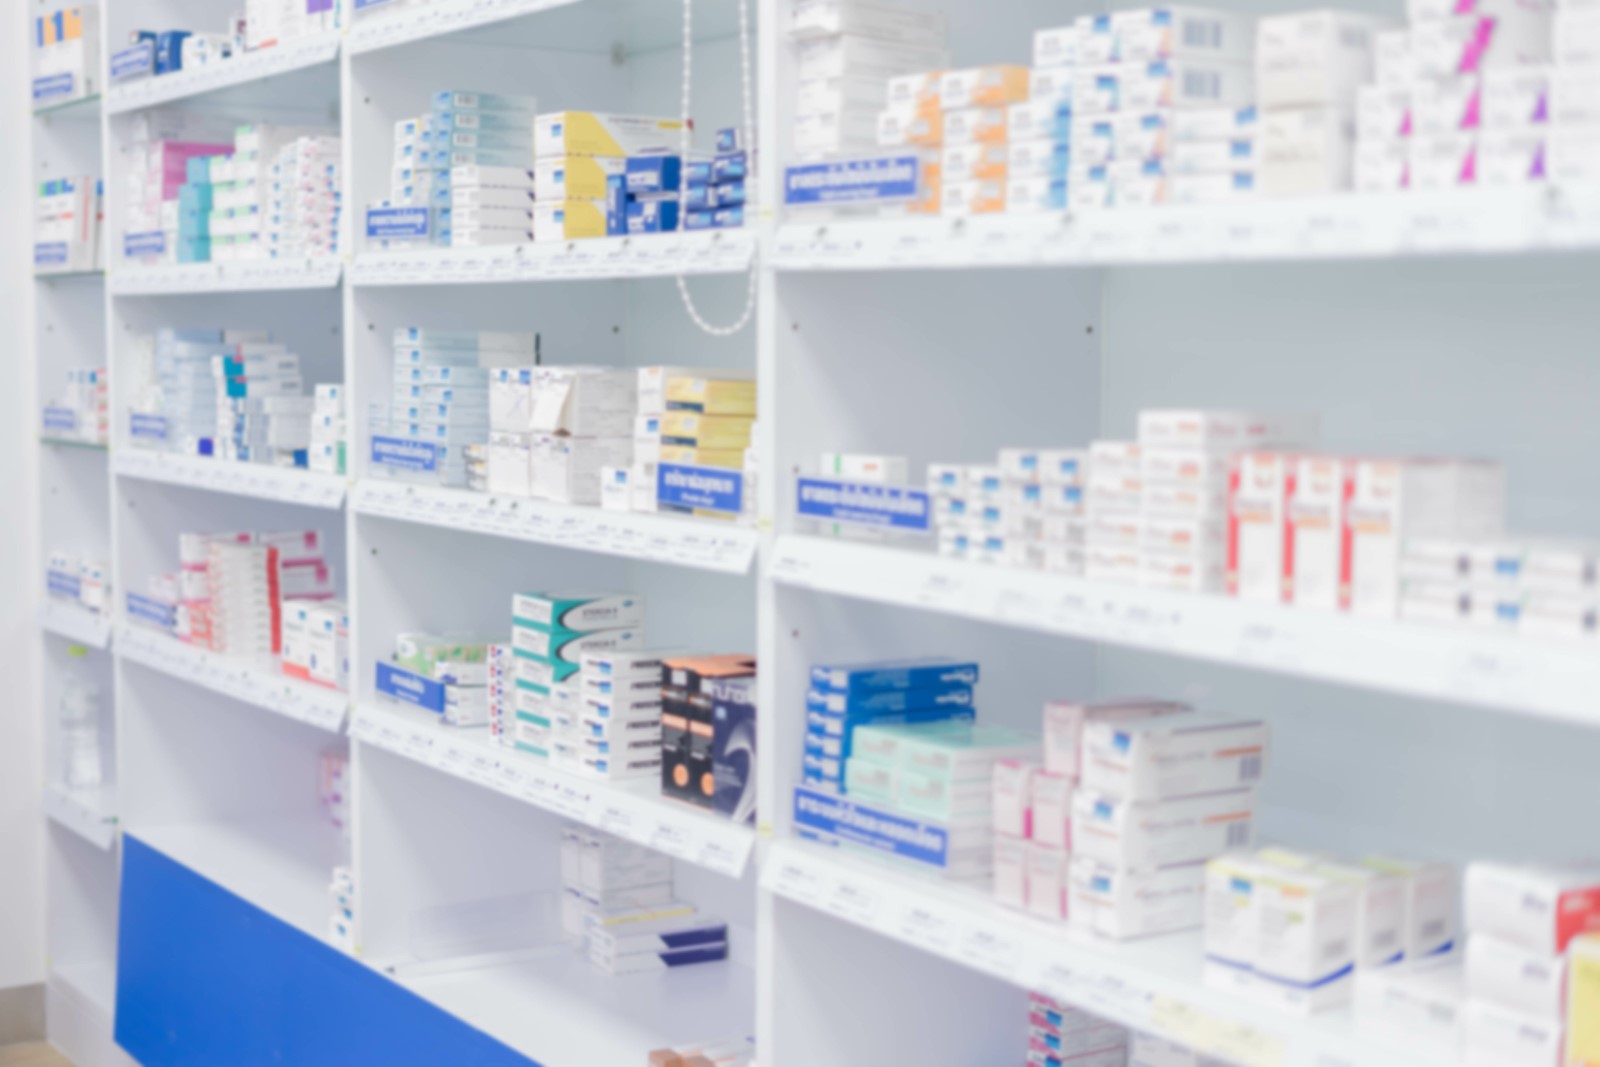 Medicines arranged in shelves, Pharmacy drugstore retail Interior blur abstract backbround with healthcare product on medicine cabinet.